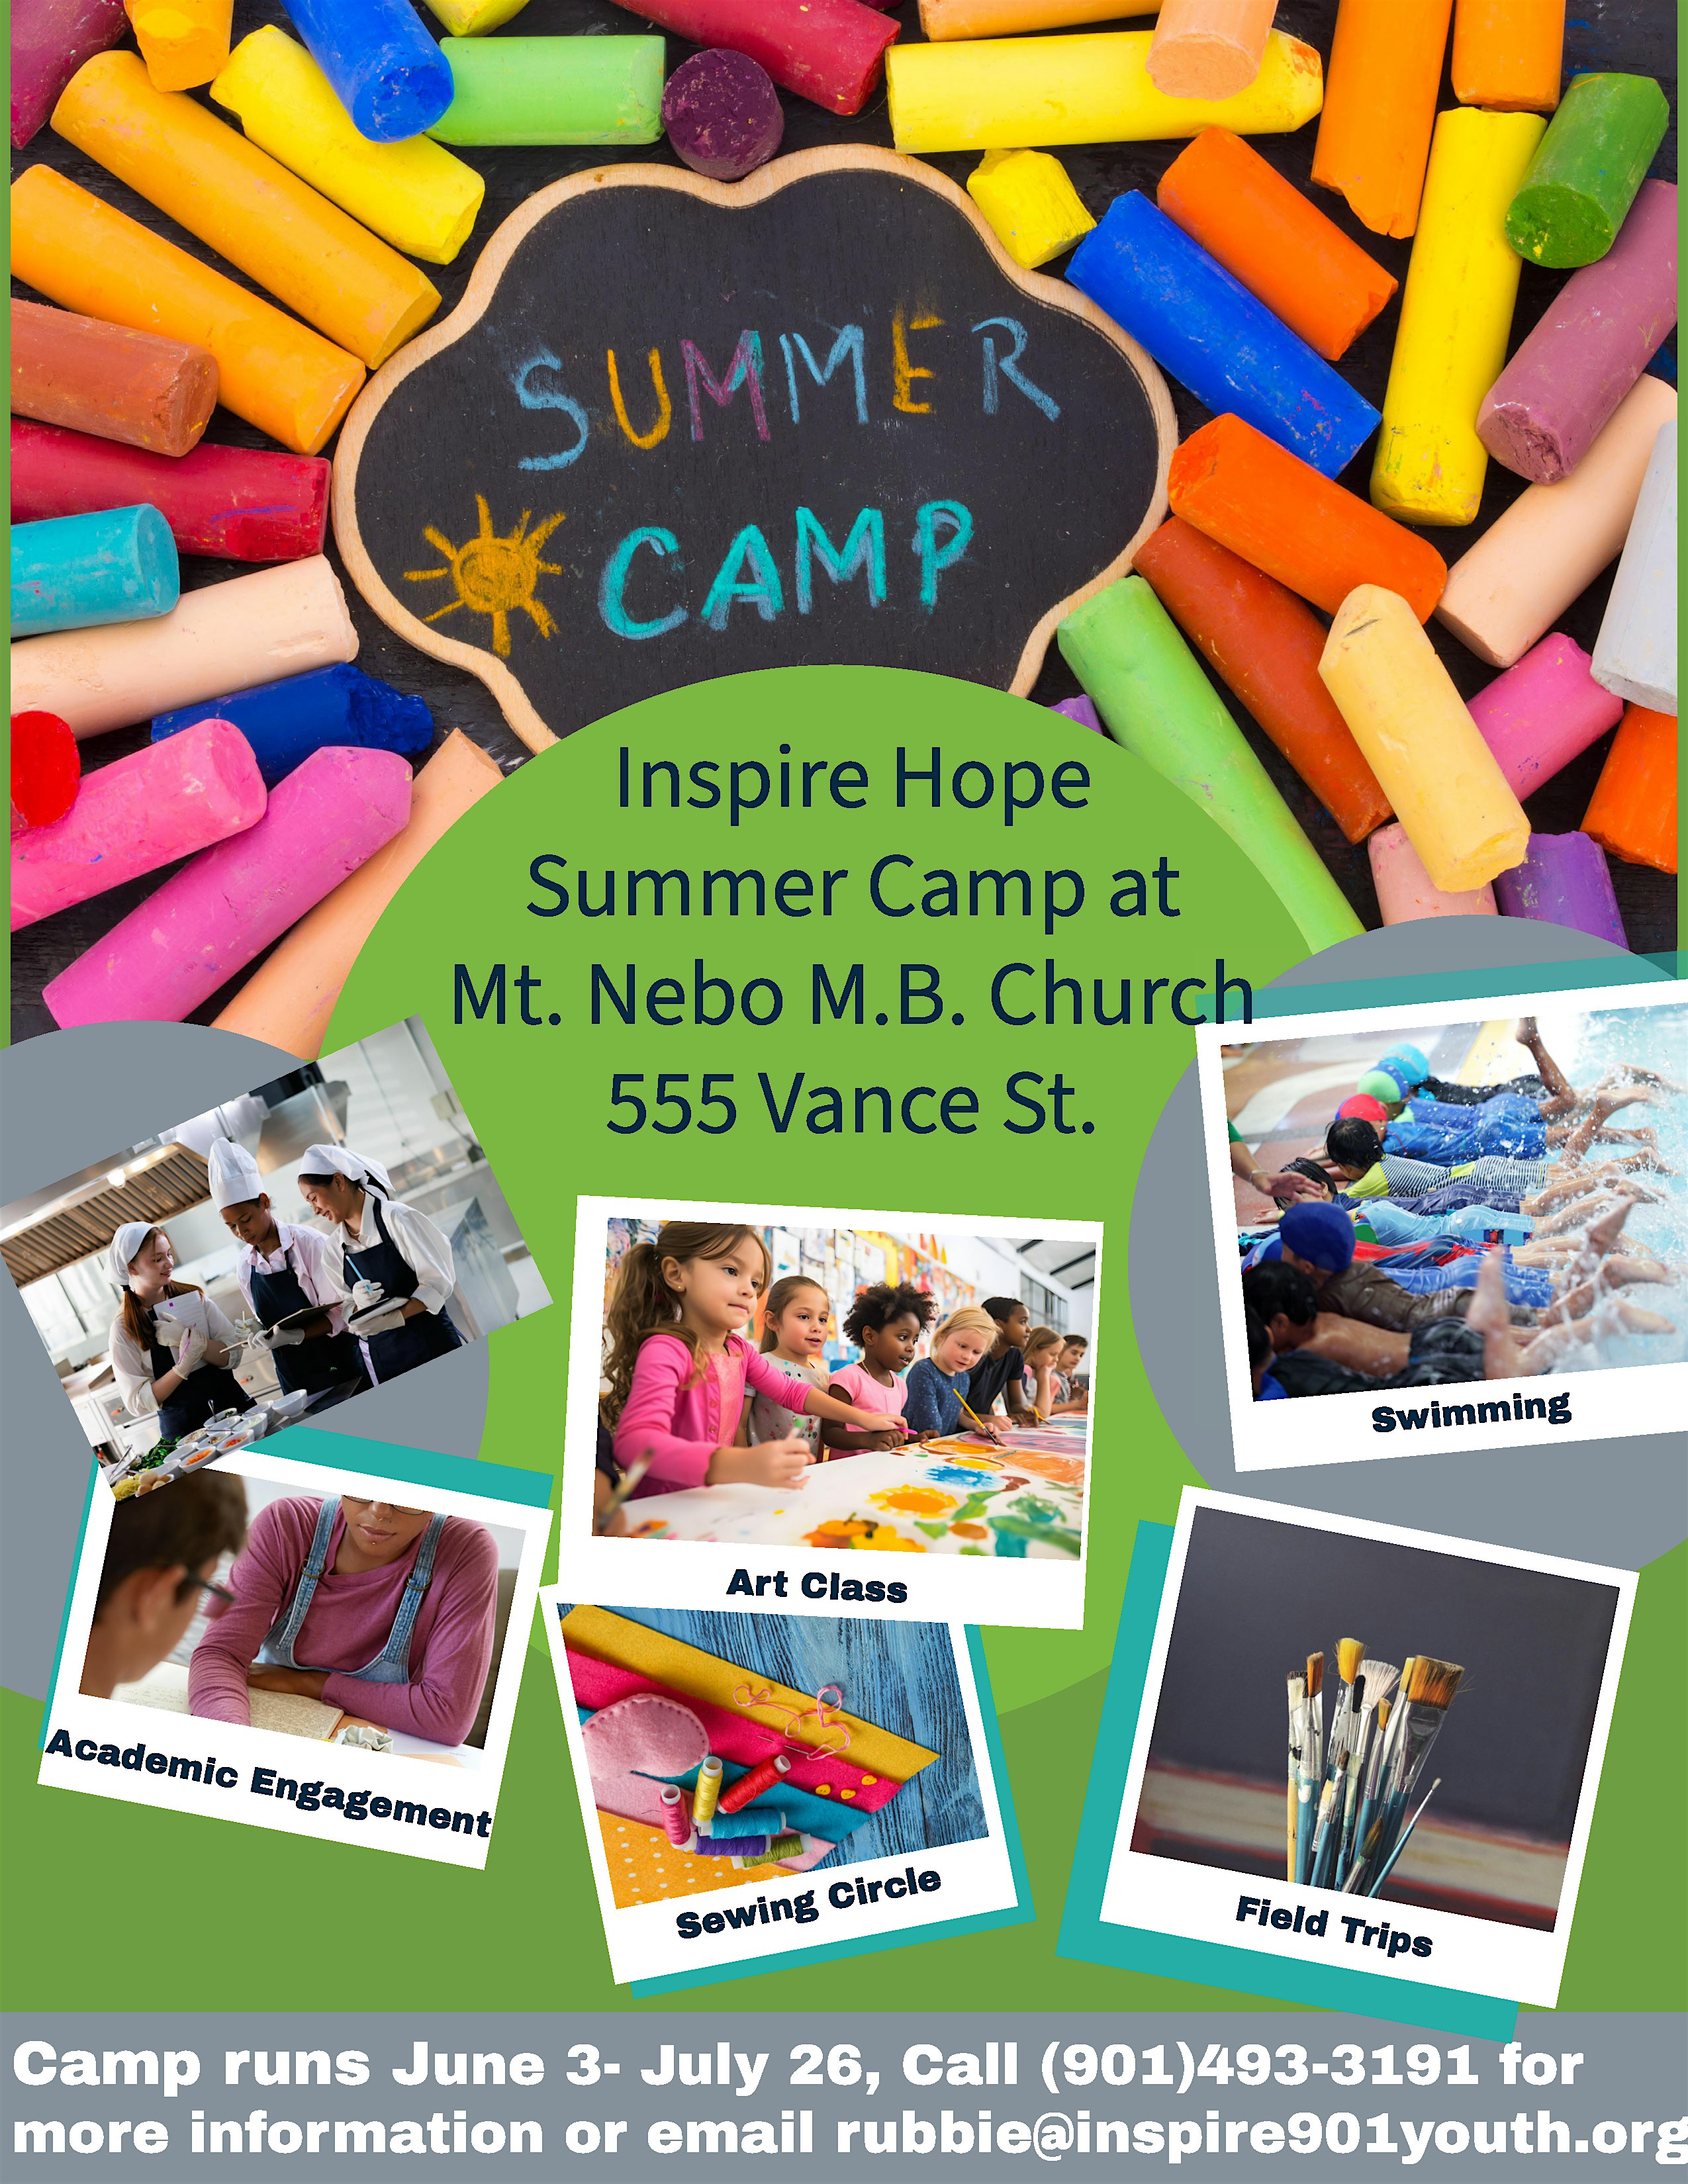 Summer Camp at Mt. Nebo M.B. Church with Inspire Hope